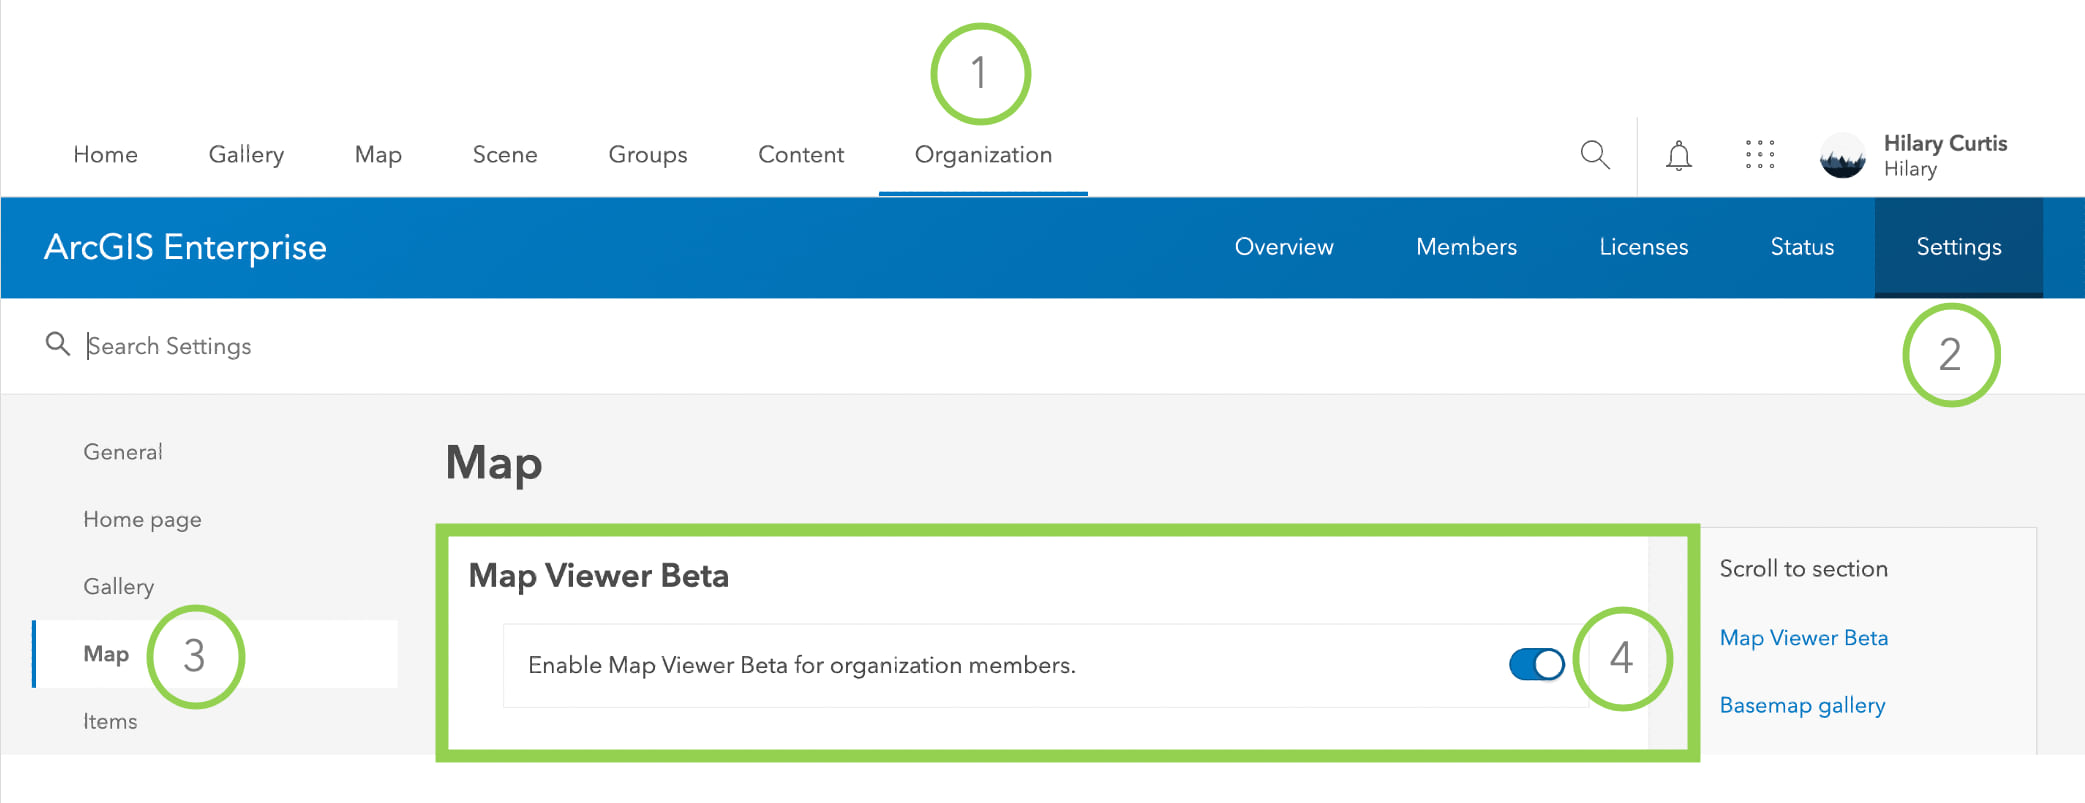 Option to enable or disable Map Viewer Beta under the Settings tab in an Enterprise portal